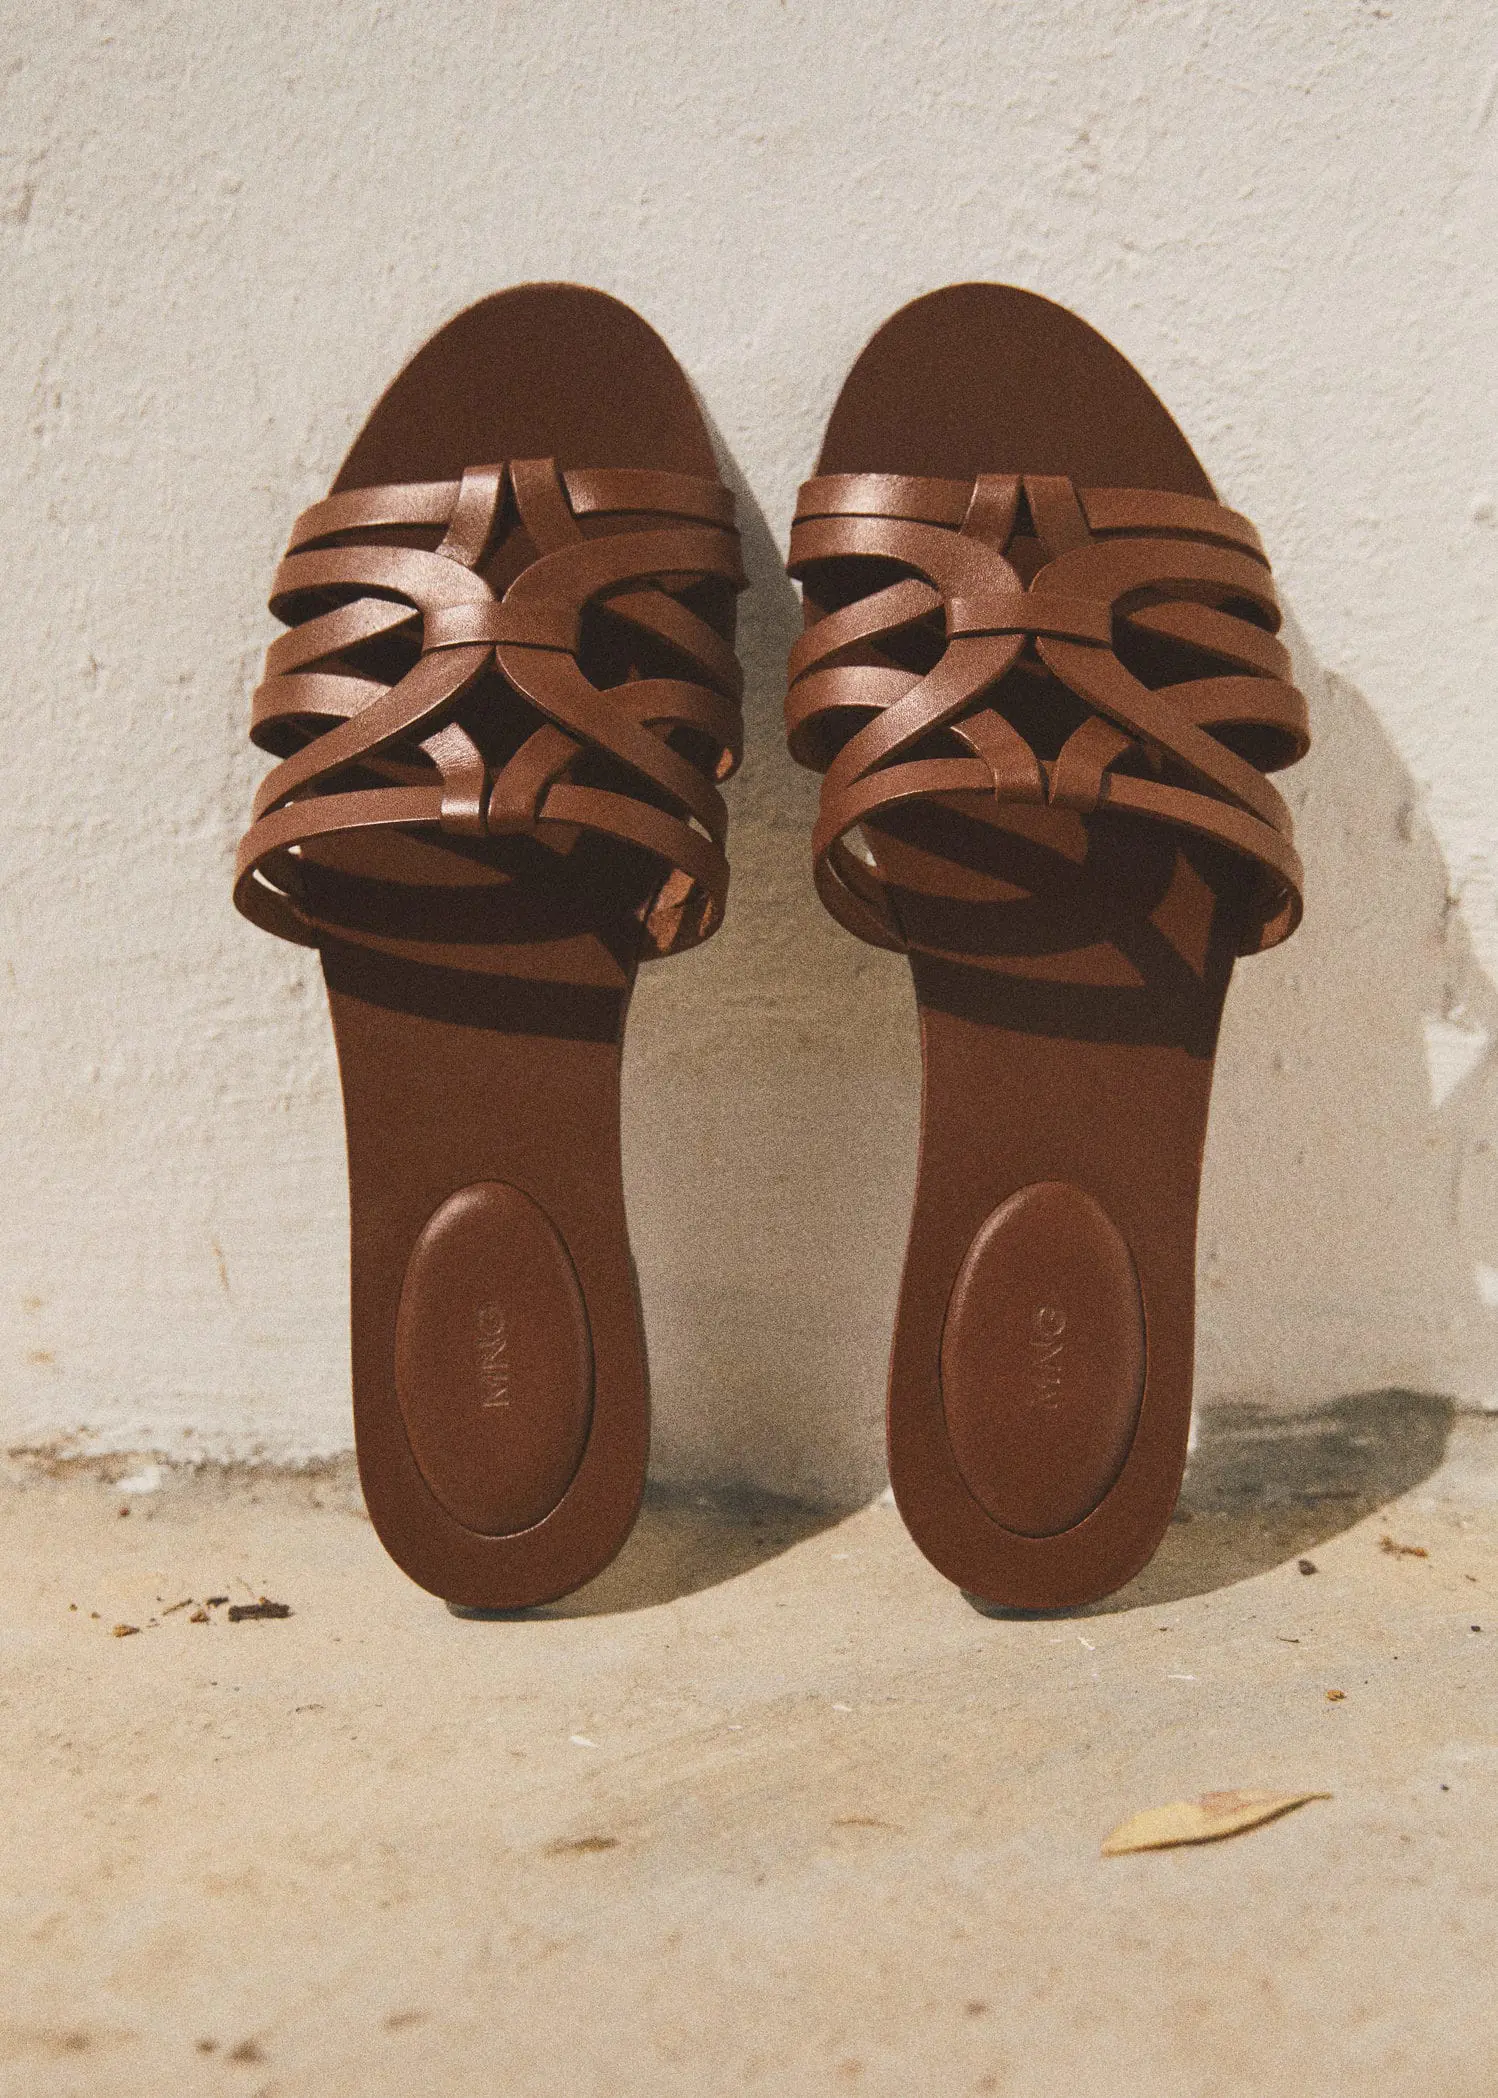 Mango Leather straps sandals. a pair of brown sandals hanging on a wall. 